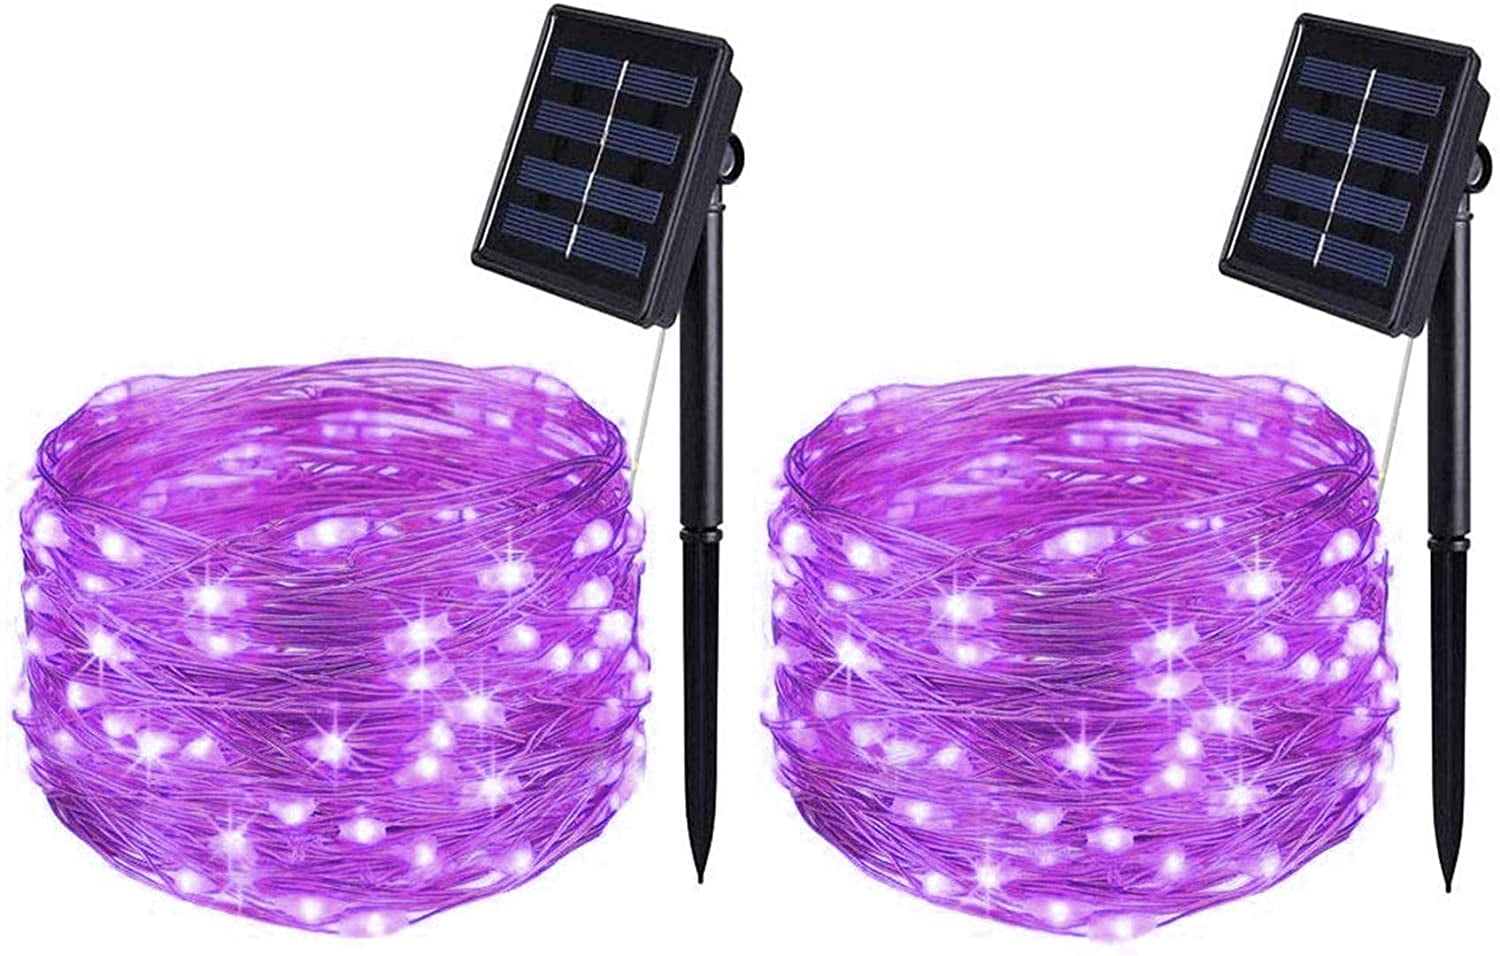 2 Pack BOLWEO Solar Powered String Lights,Solar Fairy Lights,Warm White,16.4Ft 